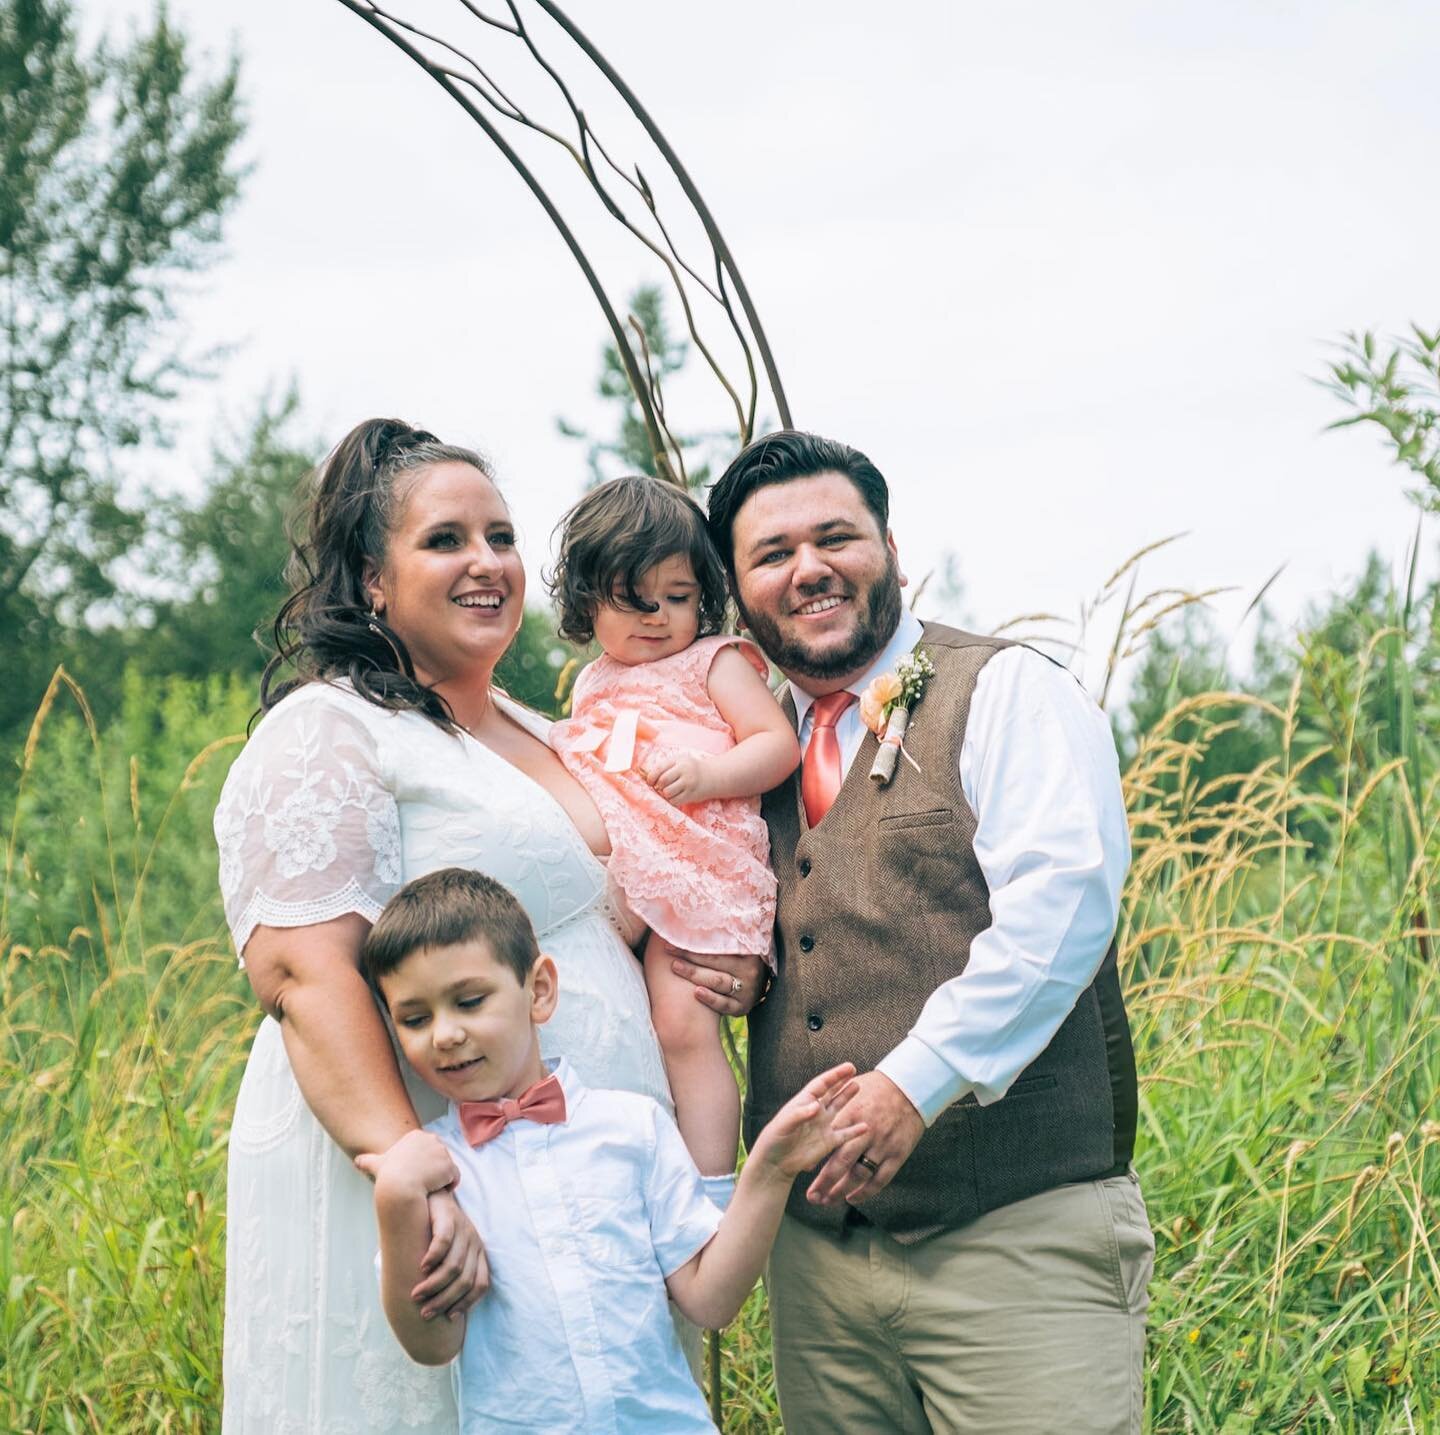 Megan &amp; Brett&rsquo;s wedding was truly a family affair with their two young kiddos. Every couple has their own unique story and it&rsquo;s one of the things I love best about wedding and family photography. 

.
.
. 
.
#myfujilove #FujifilmX_US #